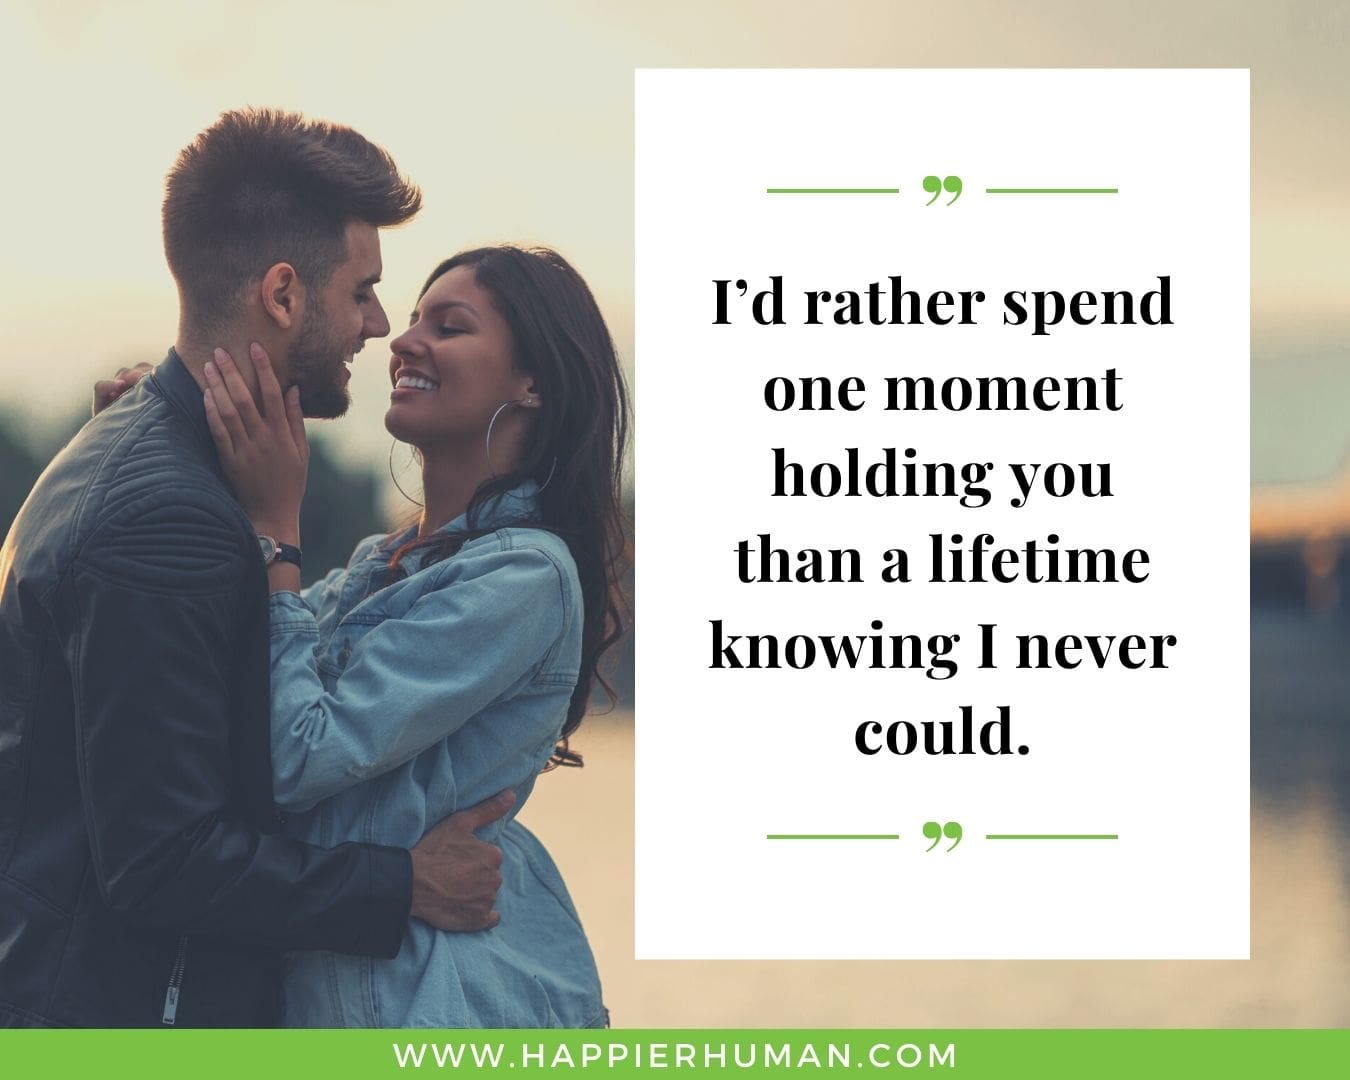 Unconditional Love Quotes for Her - “I’d rather spend one moment holding you than a lifetime knowing I never could.”